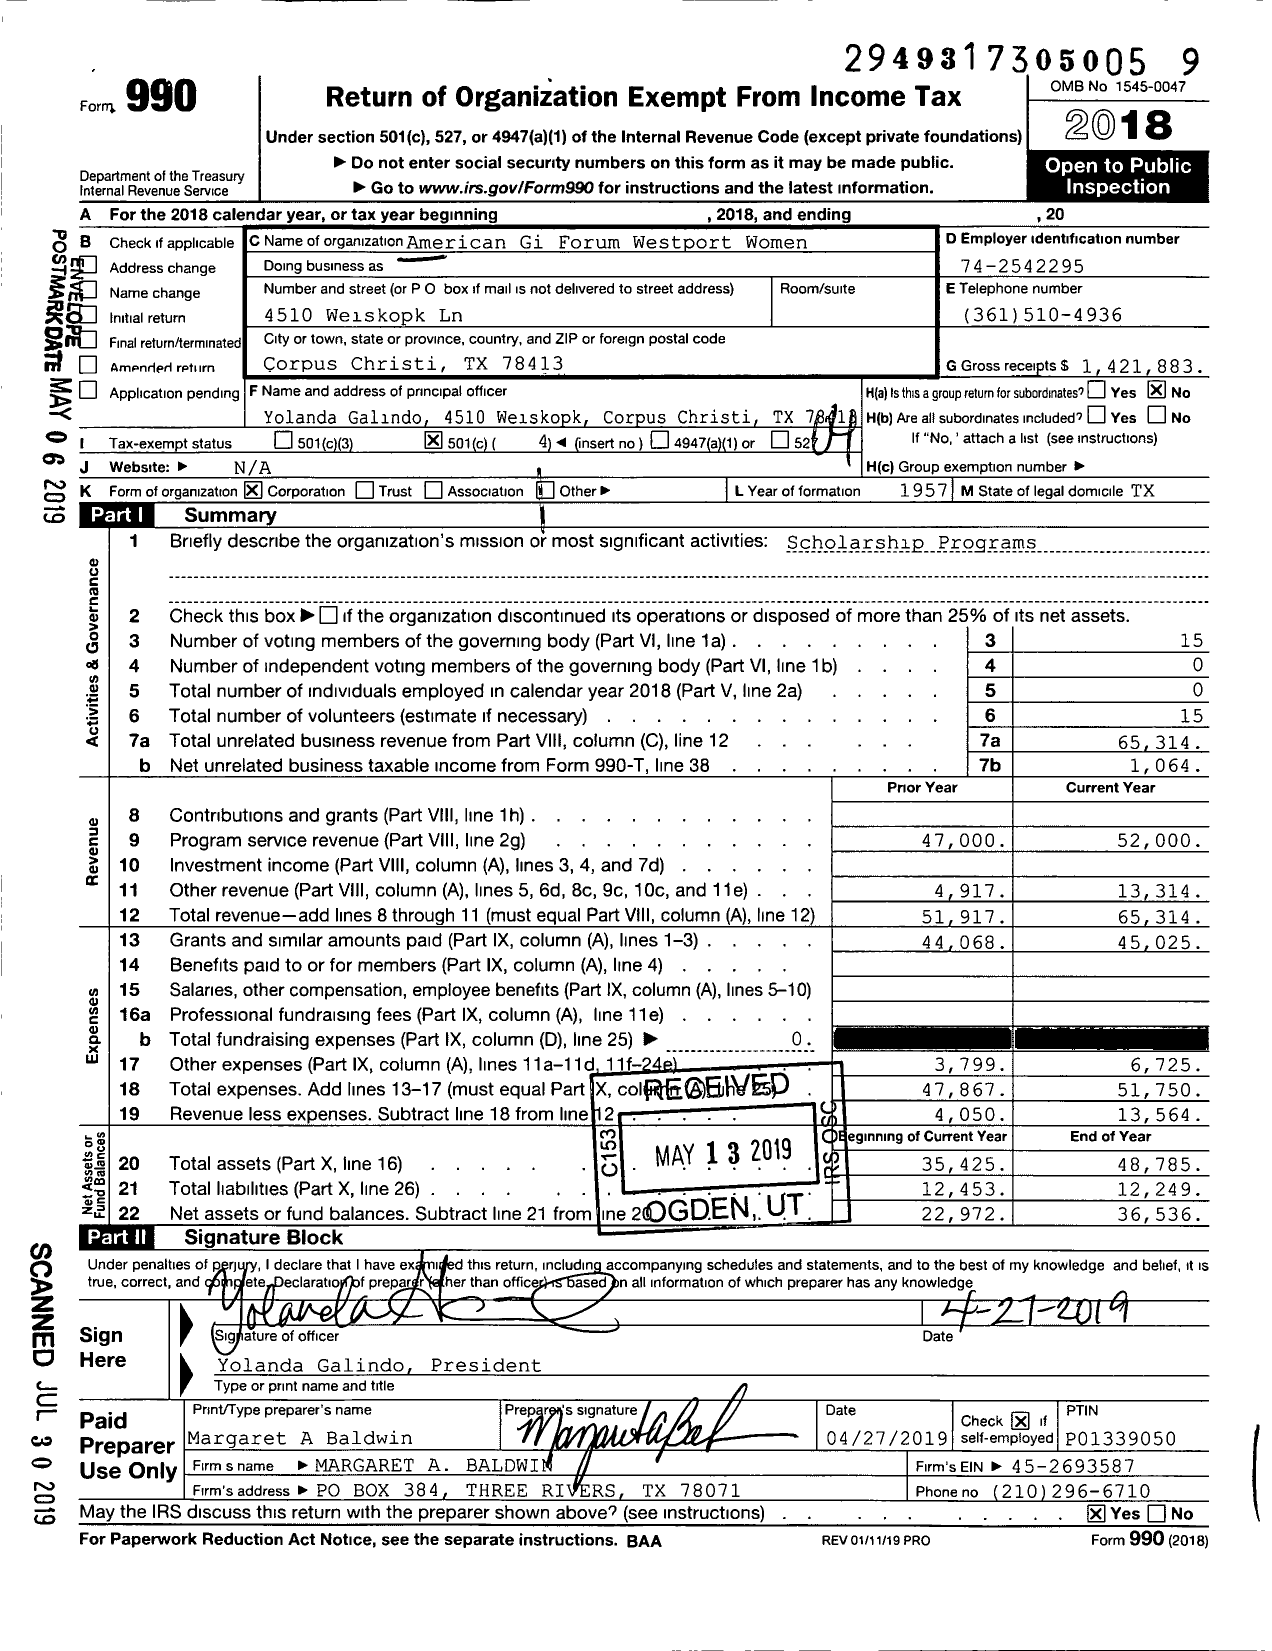 Image of first page of 2018 Form 990O for American Gi Forum Westport Women